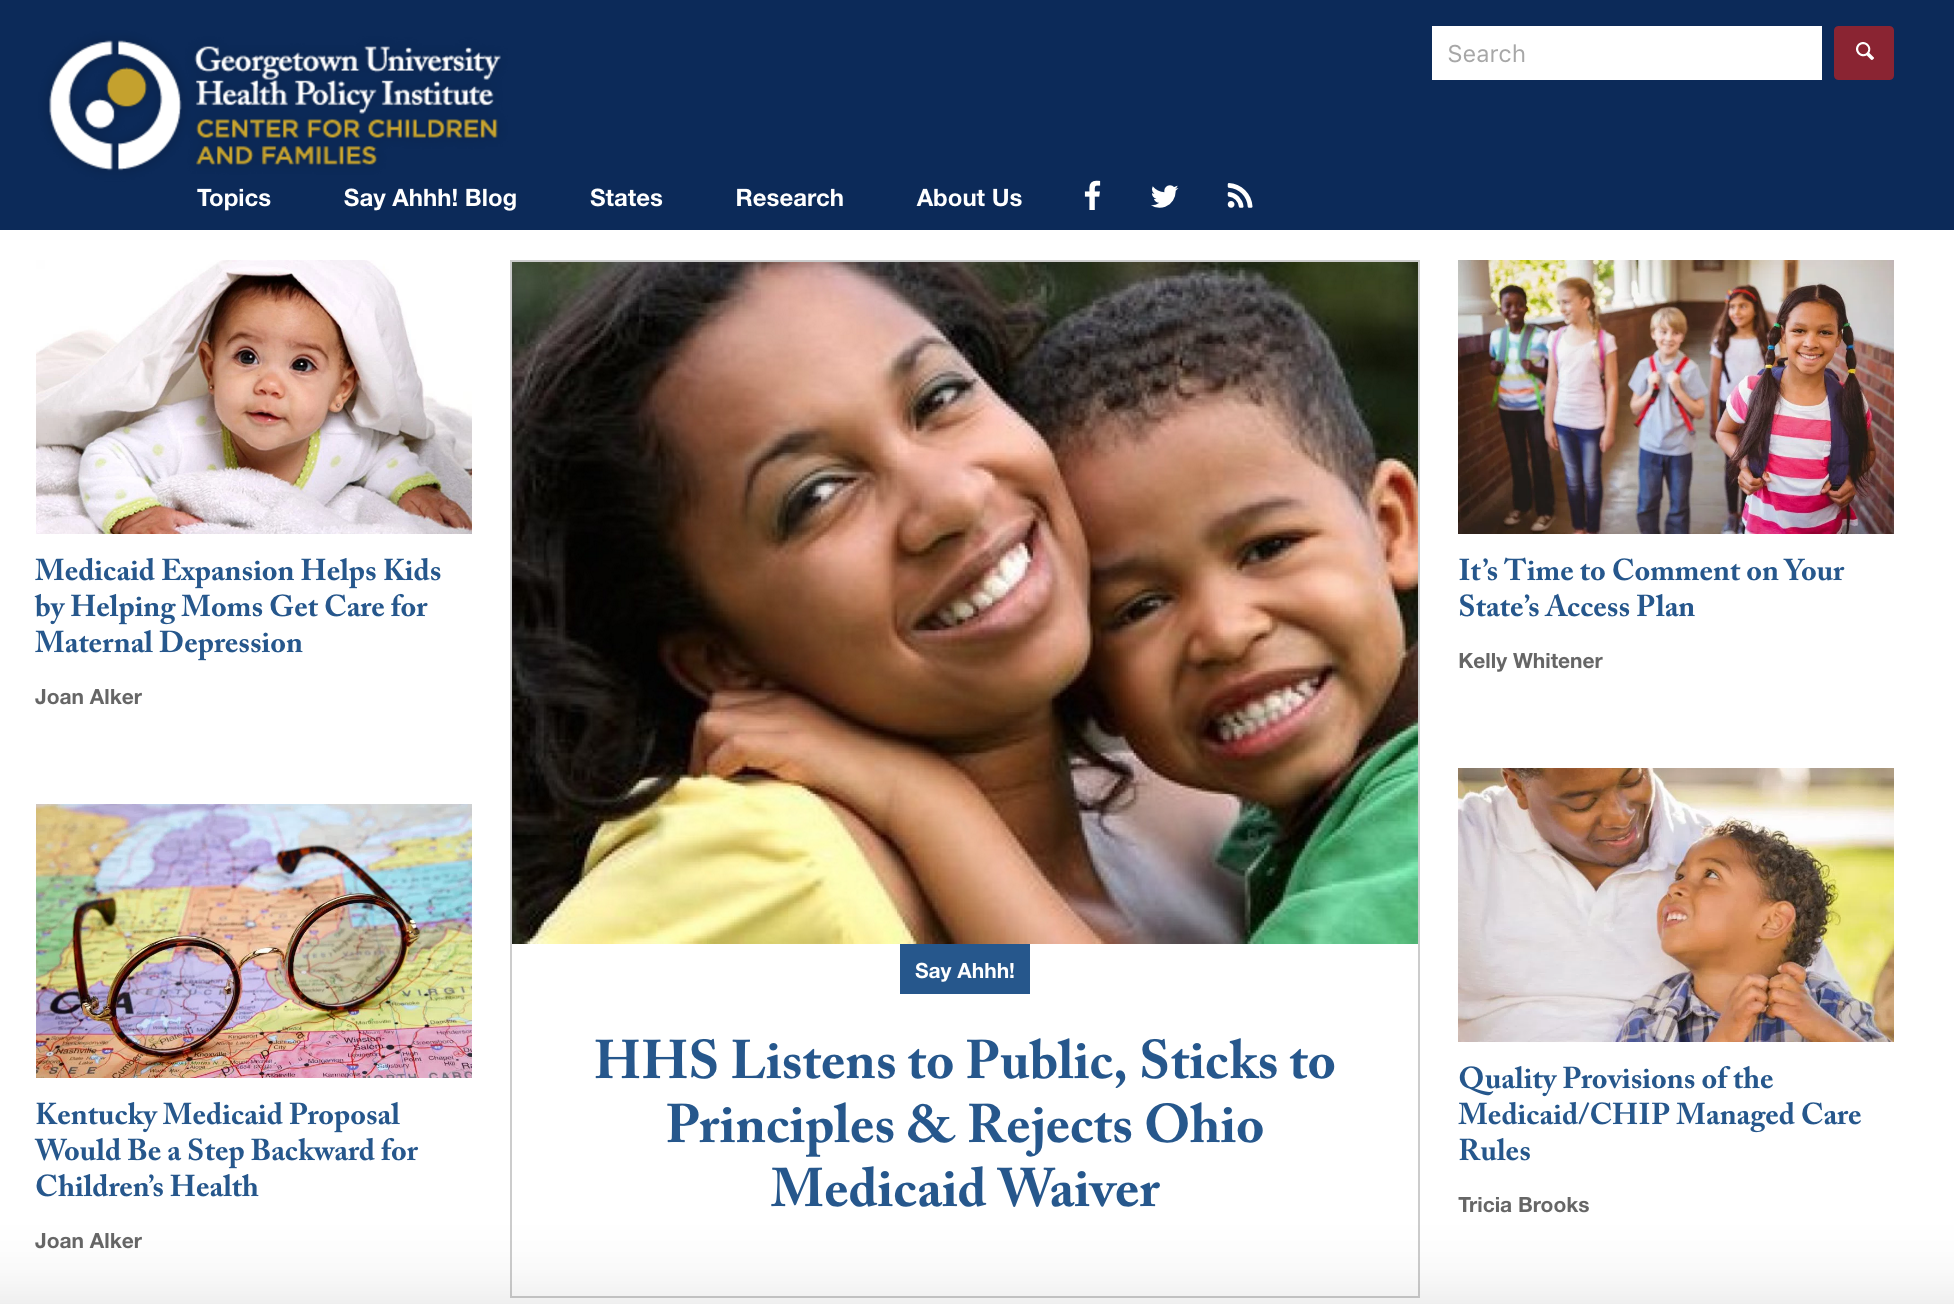 A screenshot of the Georgetown home page, with a blue header and navigation bar at the top, one main featured article and image in the middle of the page surrounded by four smaller articles and images